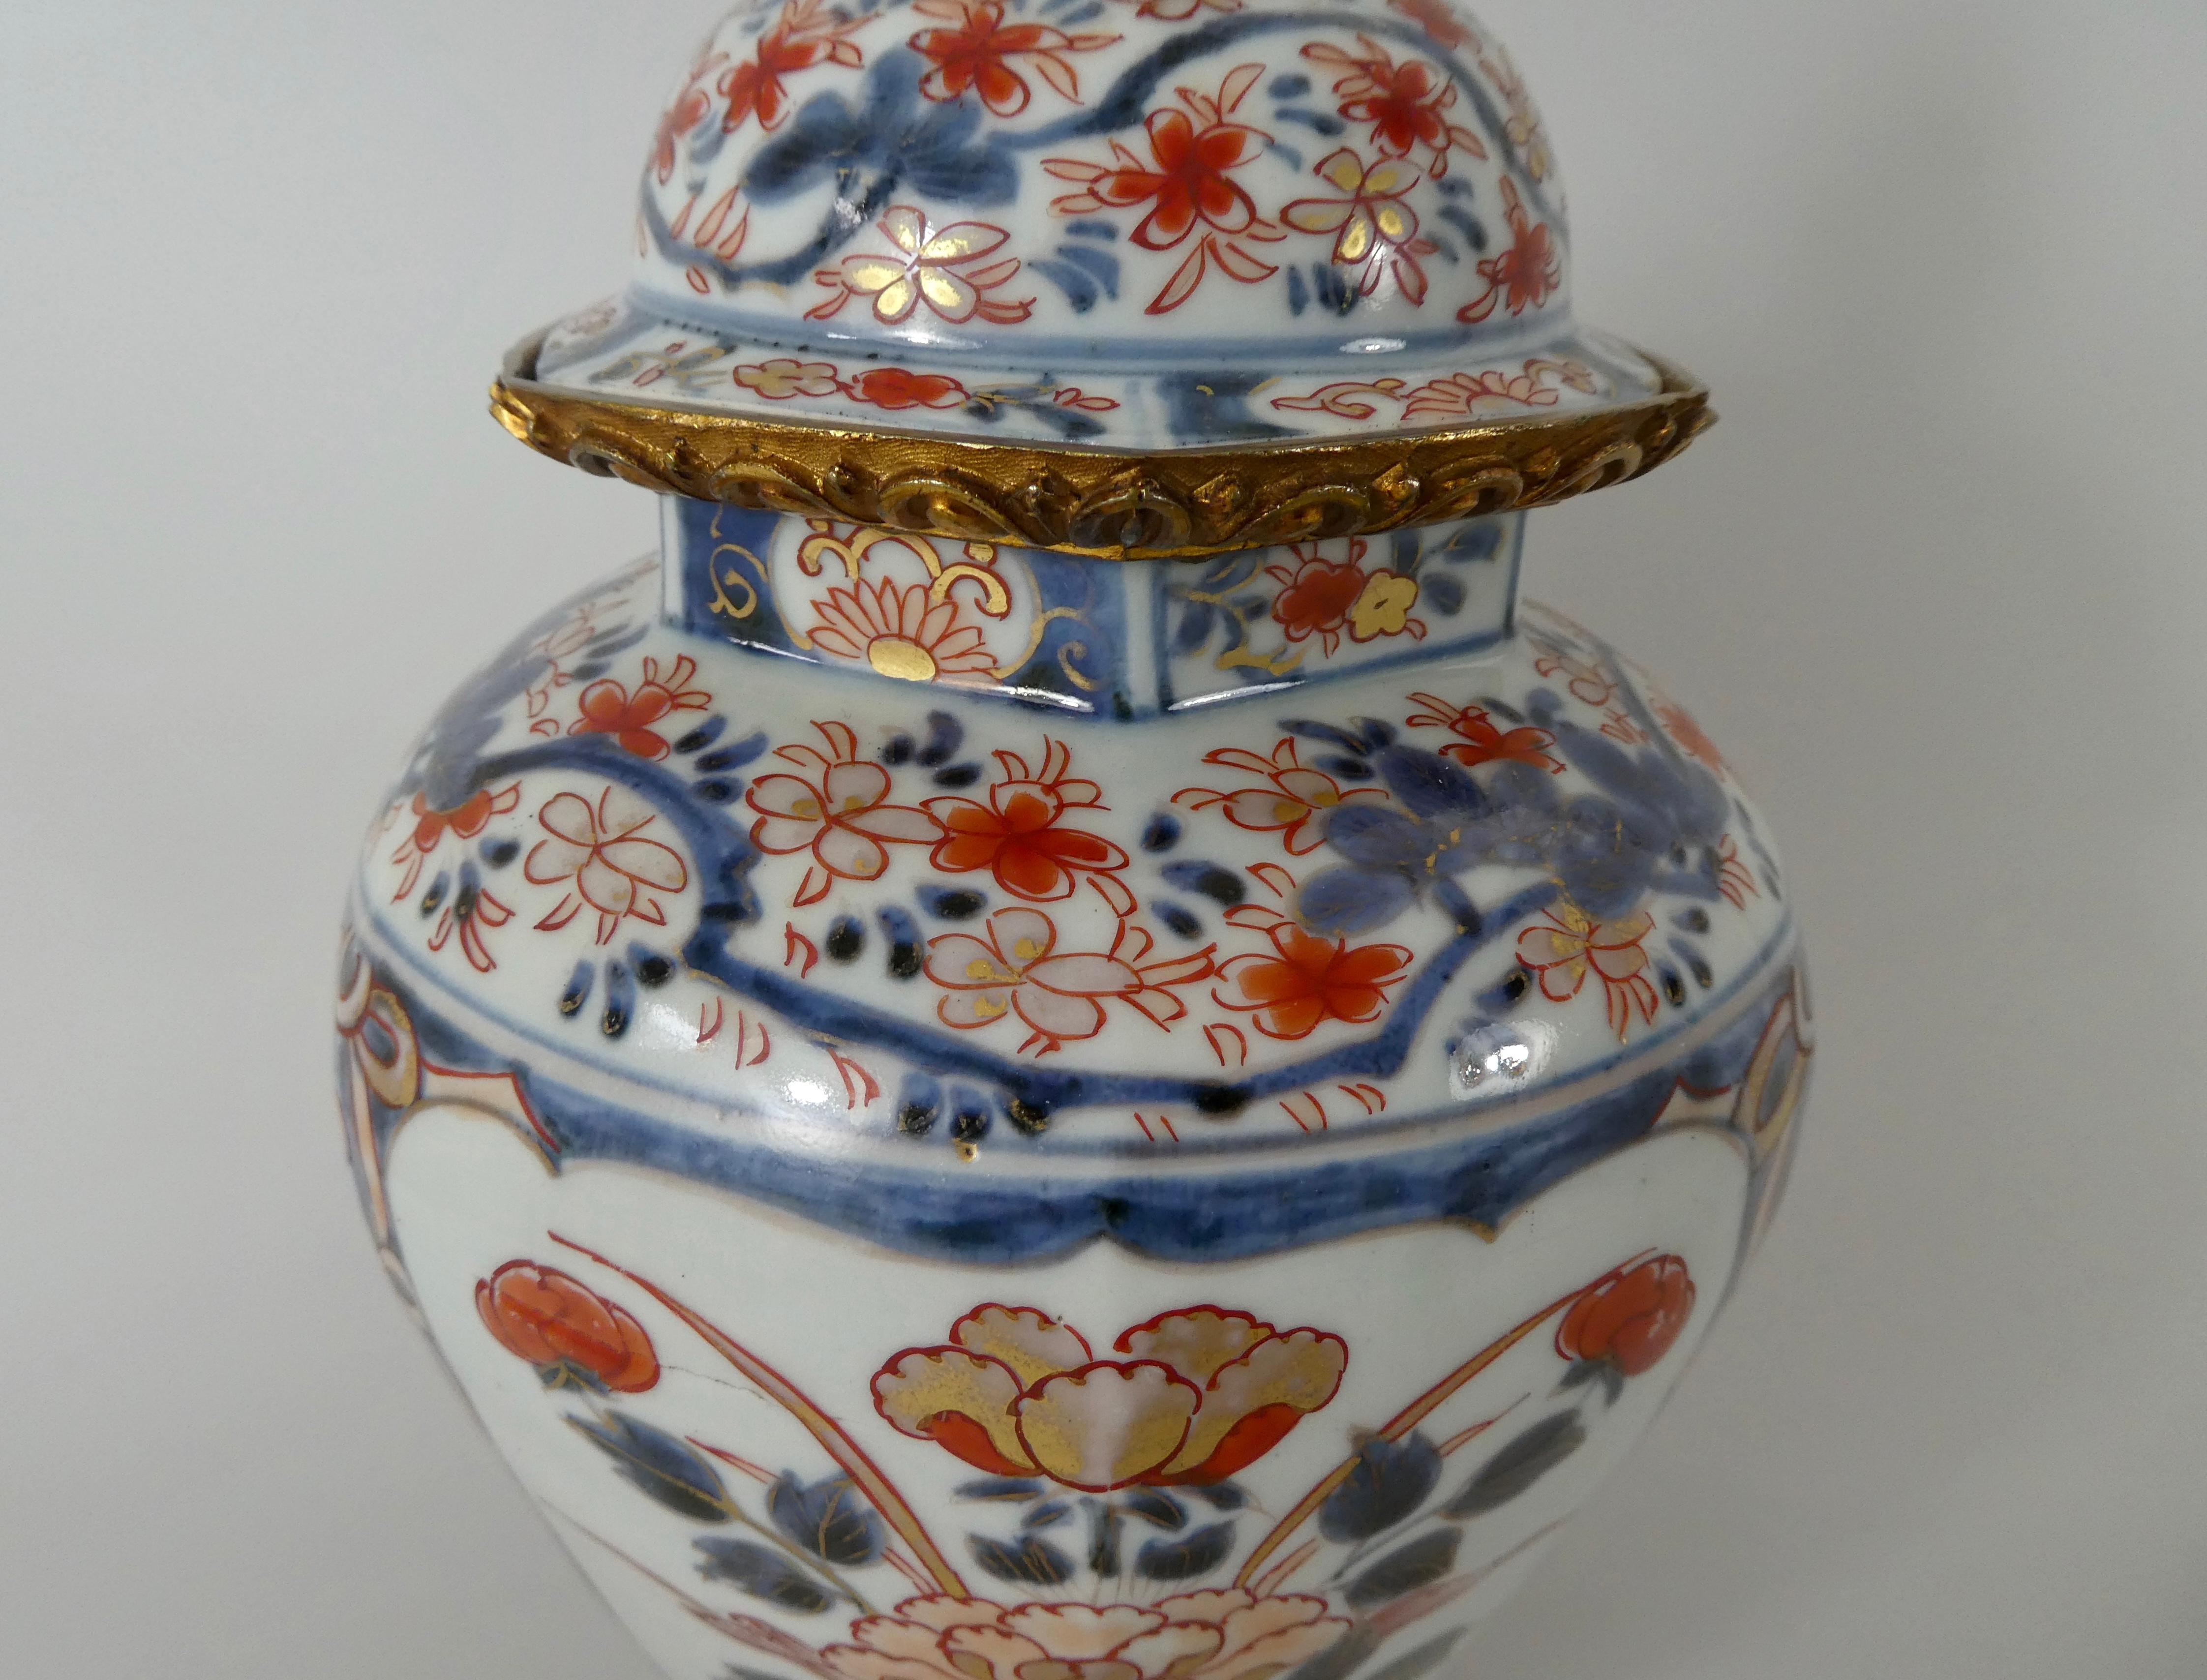 Fired Pair Japanese Imari porcelain vases and covers, c. 1690. Genroku Period.